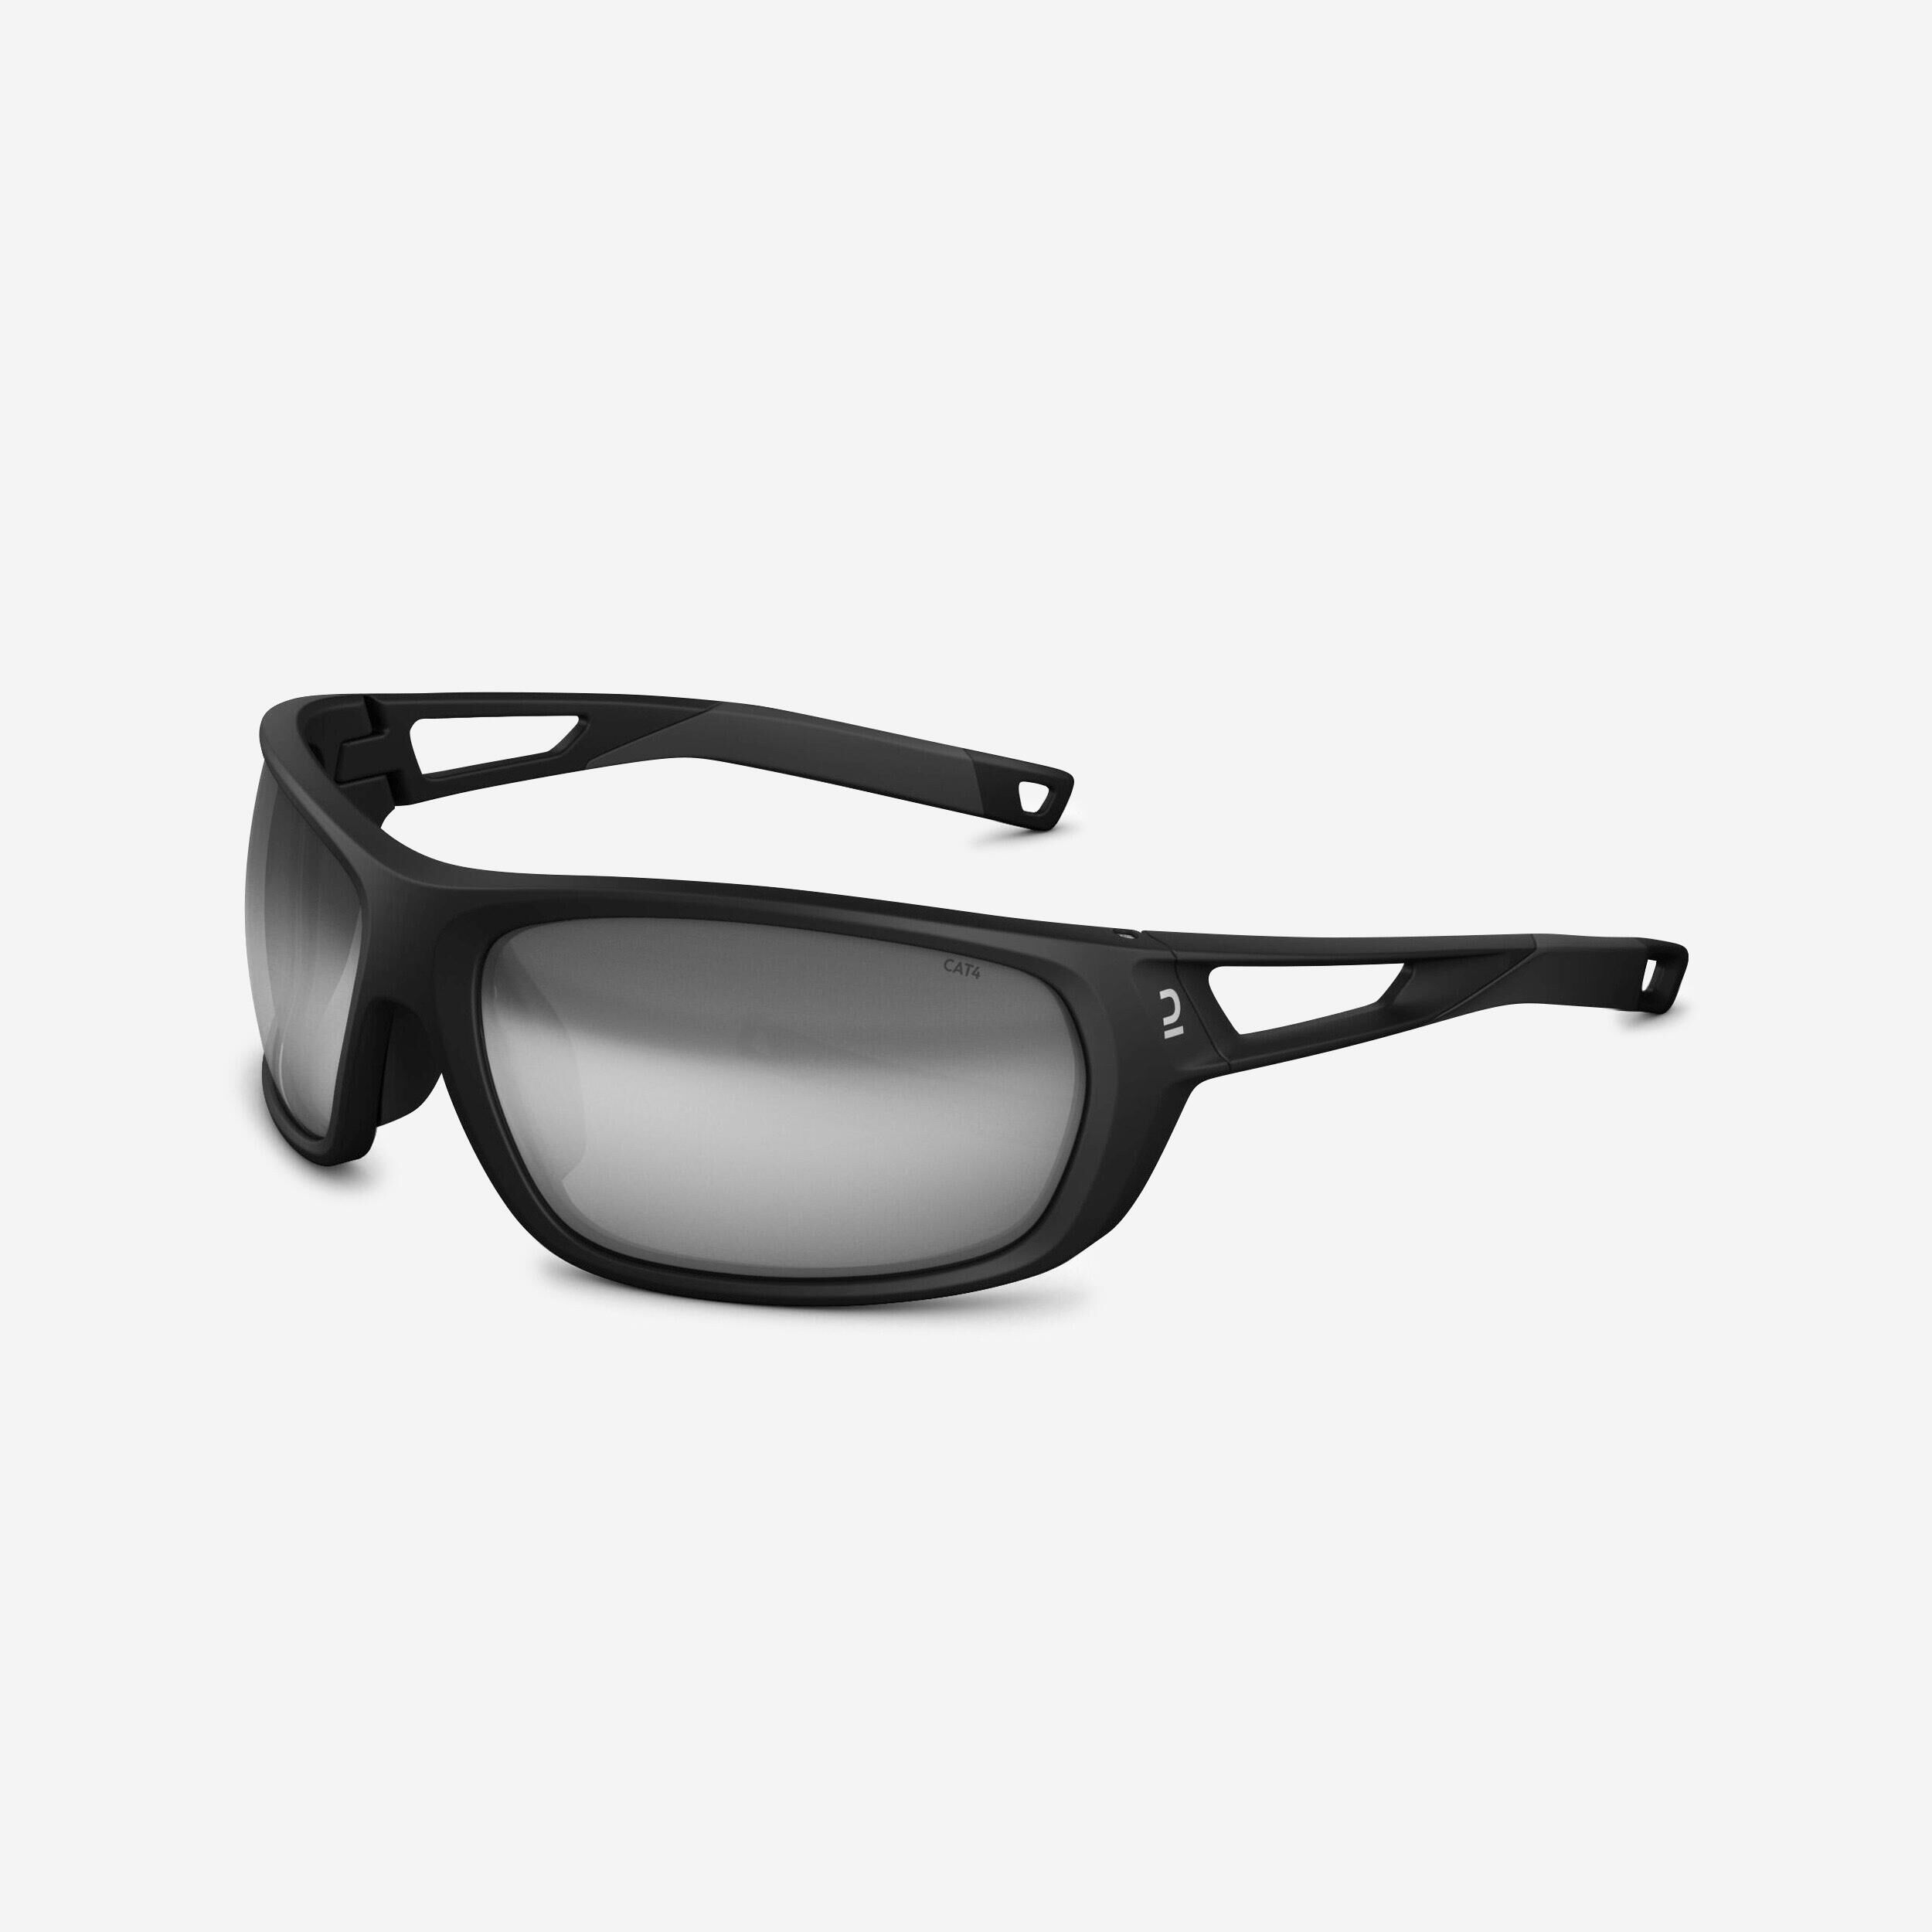 QUECHUA Adult hiking sunglasses MH580 – Category 4